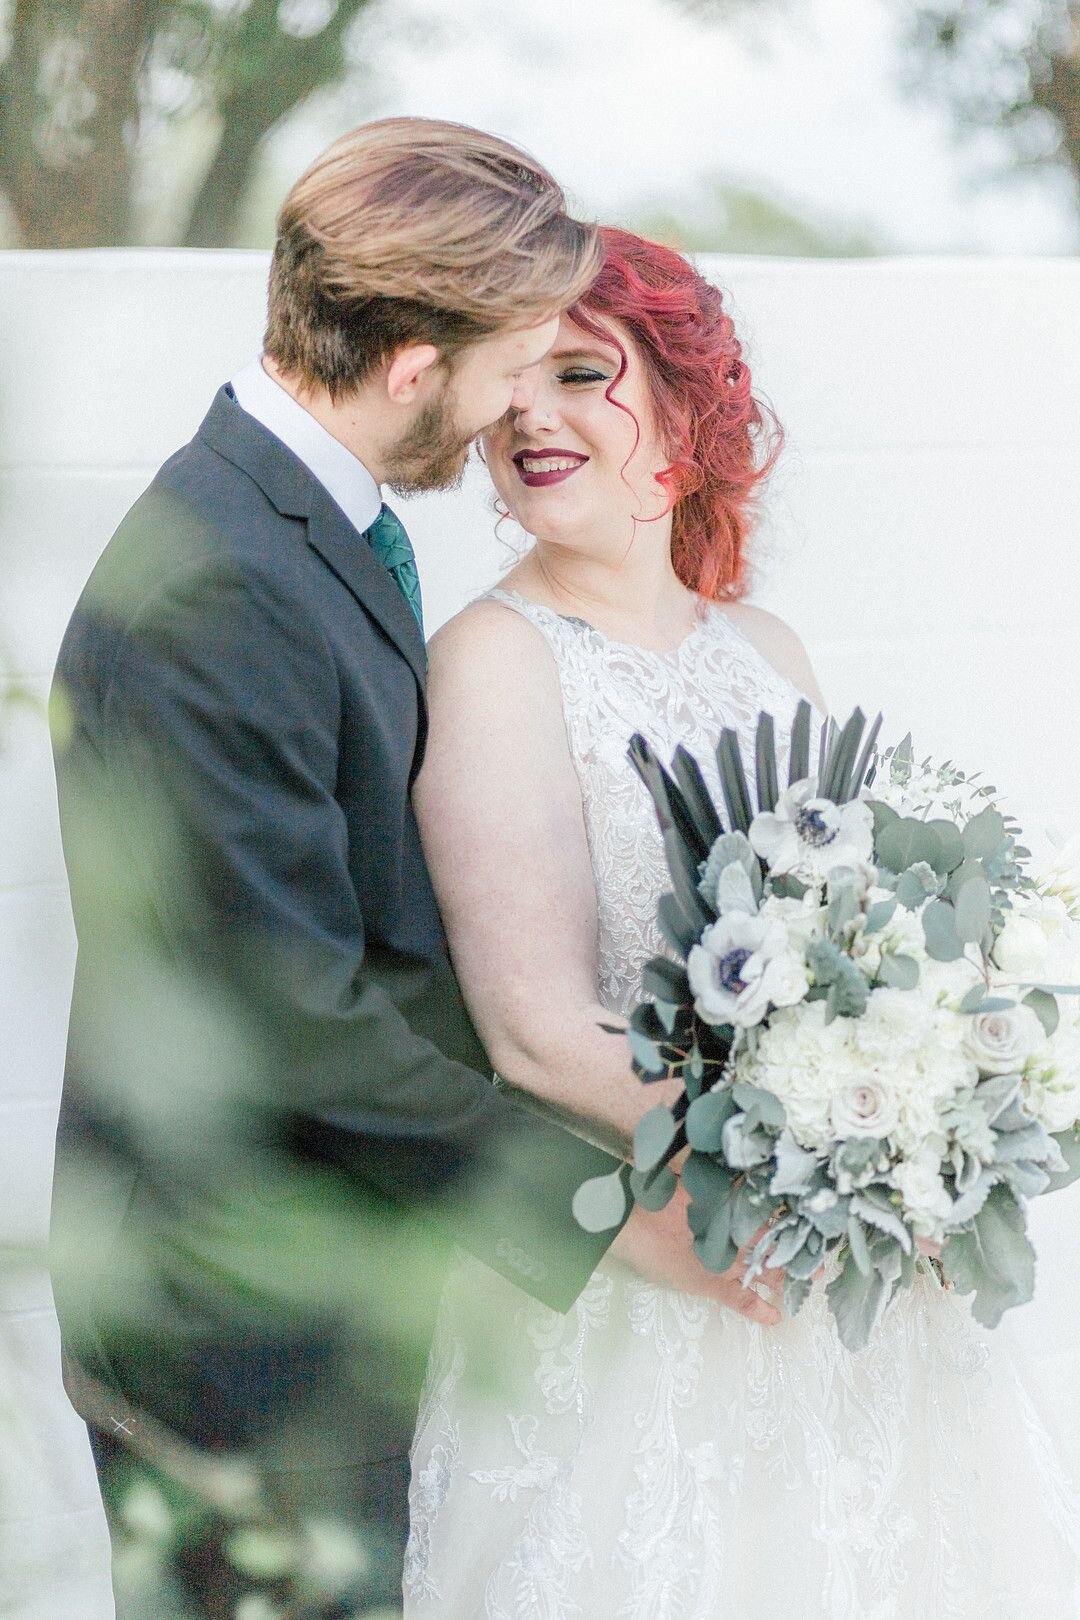 House Slytherin - A Harry Potter Inspired Styled Wedding_Jessica Thomas Photography_Slytherin-186_low.jpg